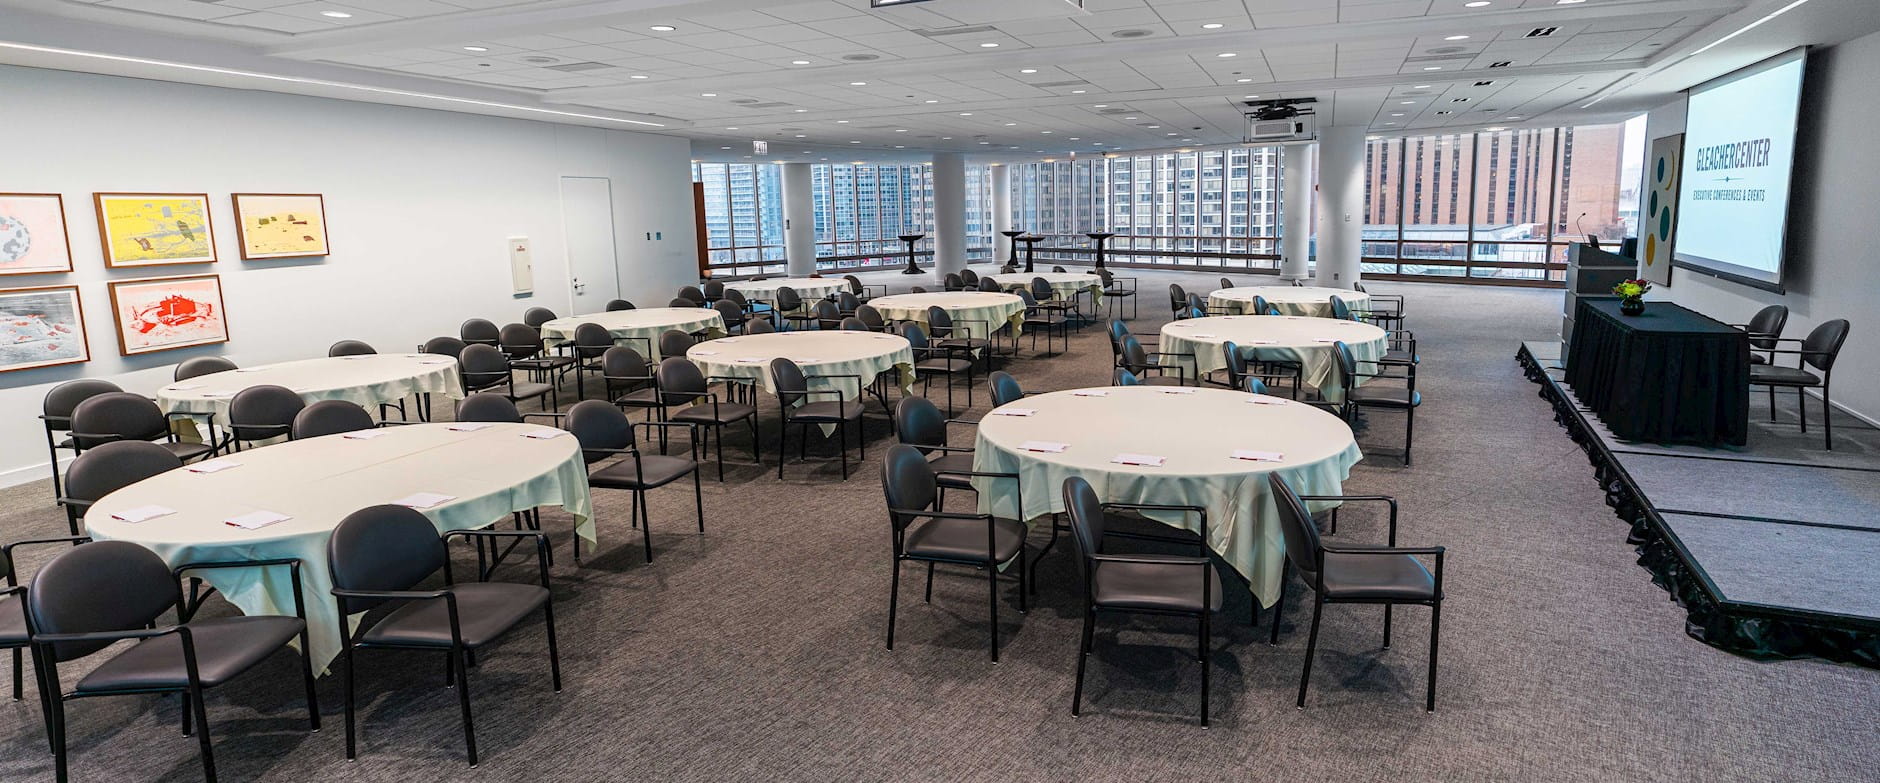 Gleacher Center dining room set for event with a presenter stage and table seating arrangements